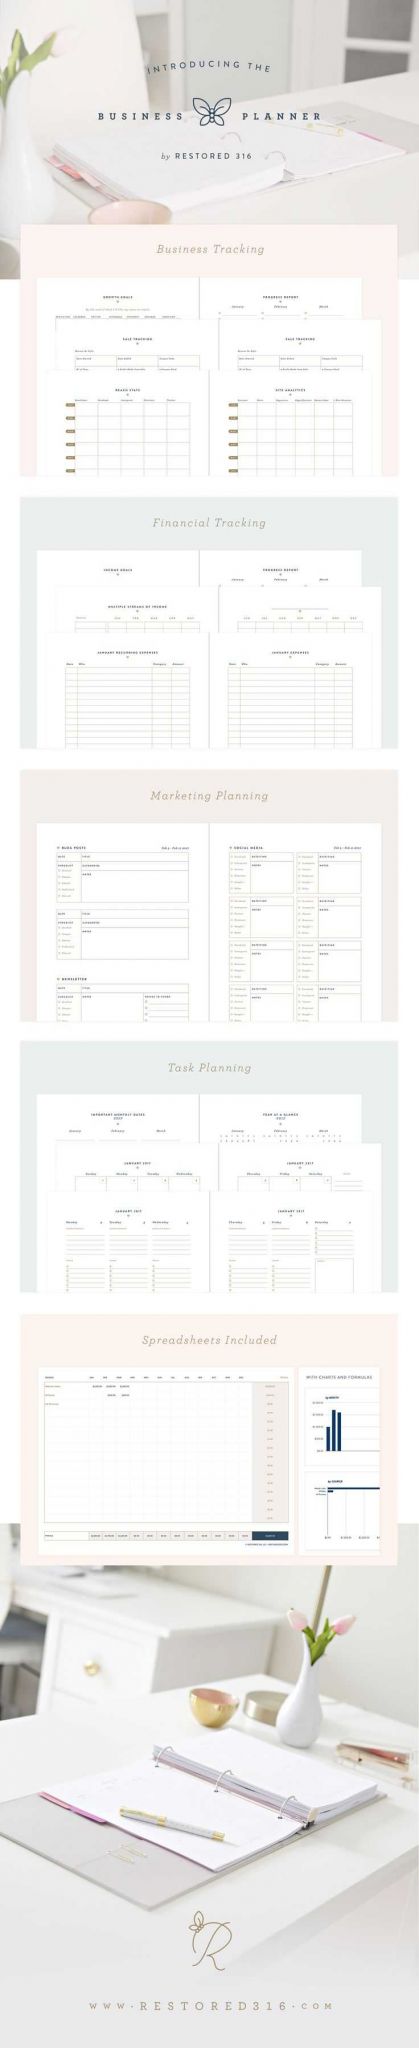 Markup and Discount Worksheet Also 83 Best Inspire Bossy Images On Pinterest